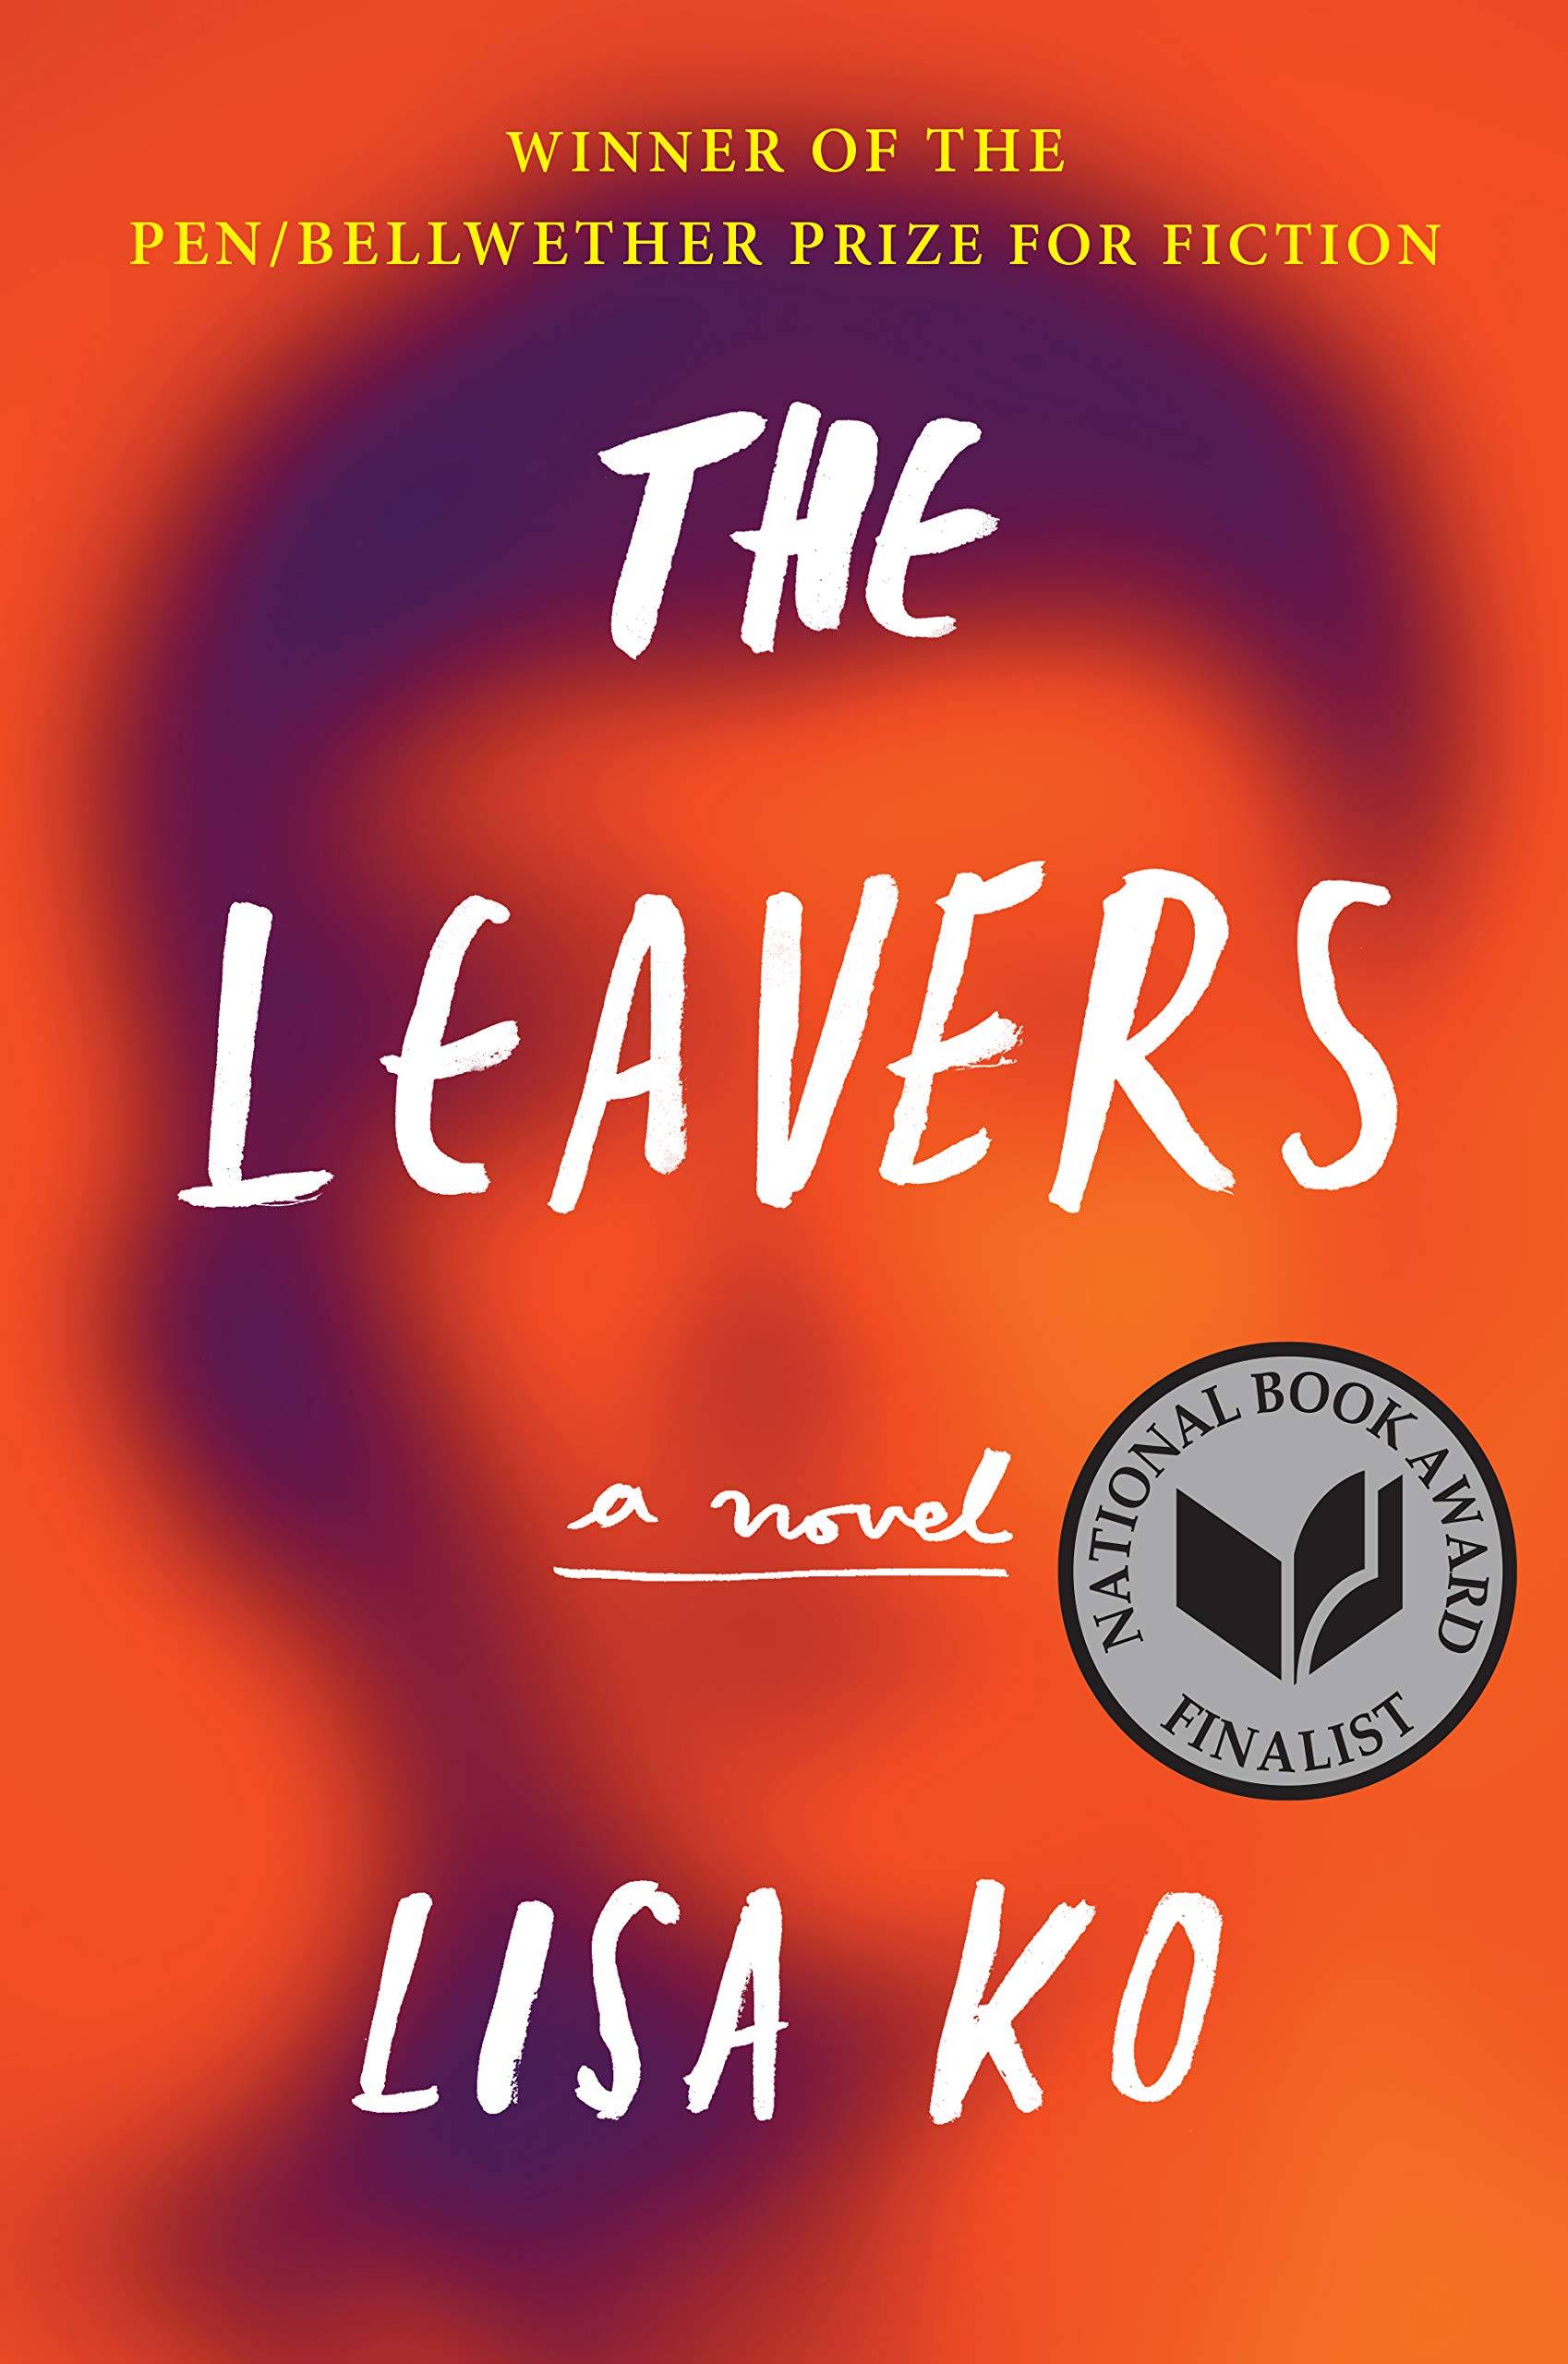 "The Leavers" book cover featuring the blurry outline of a person.